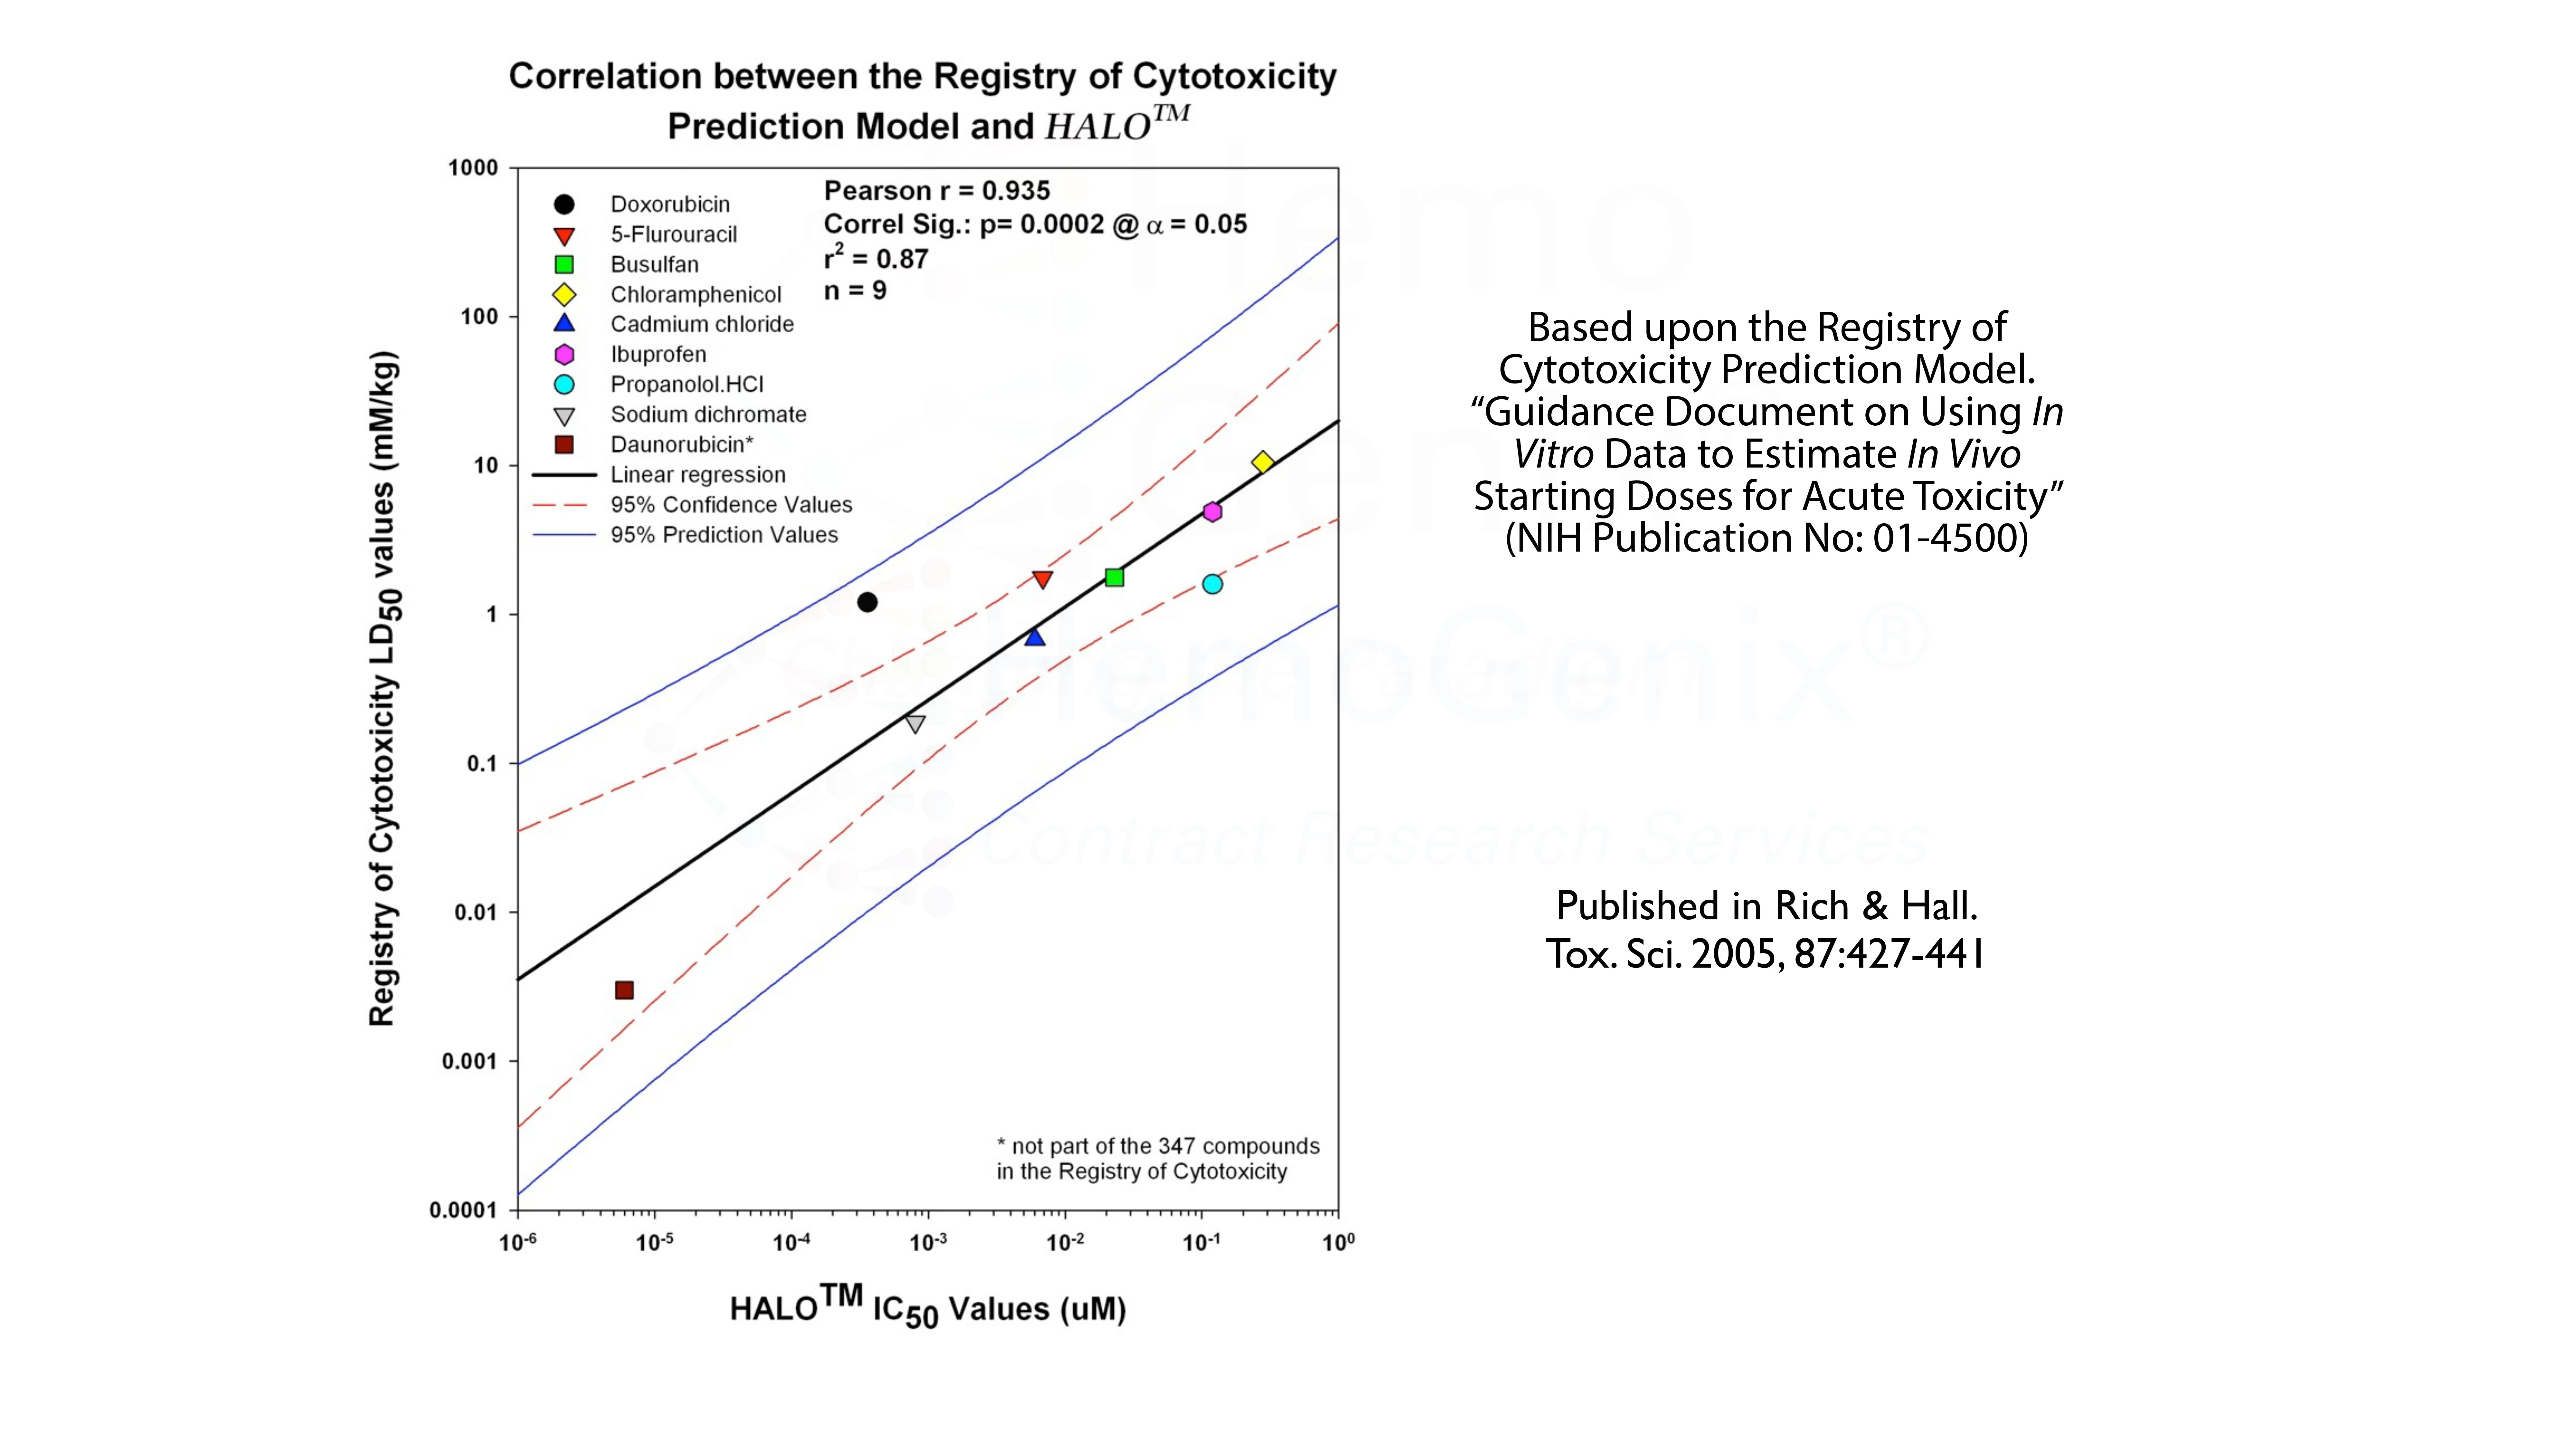 Validation of HALO-Tox HT using the Registry of Cytotoxicity Prediction Model